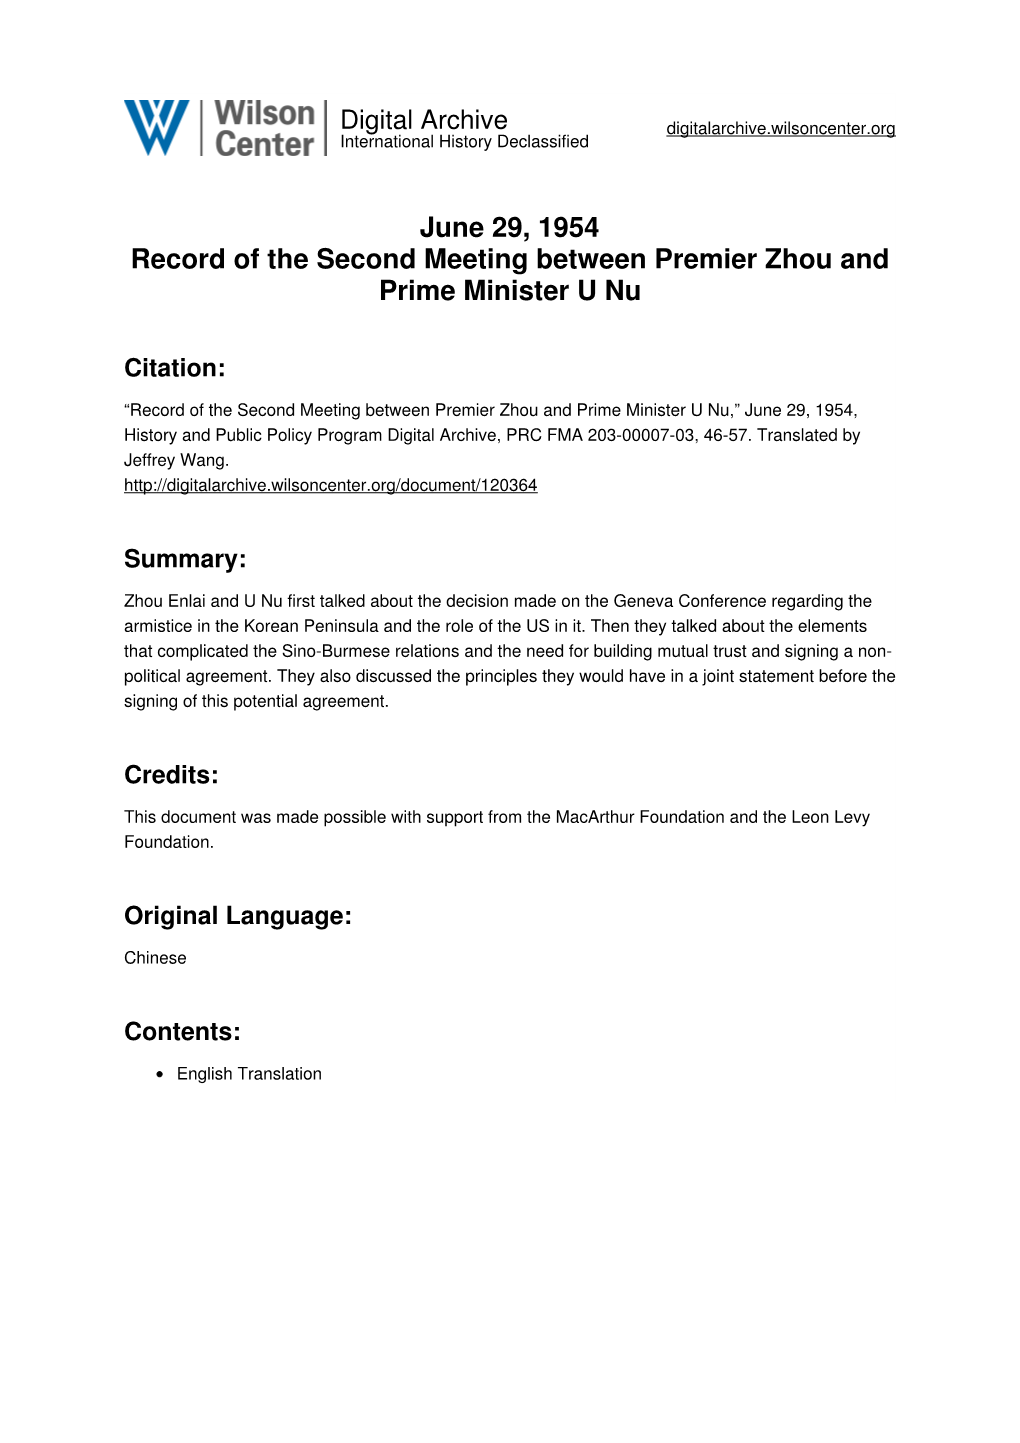 June 29, 1954 Record of the Second Meeting Between Premier Zhou and Prime Minister U Nu